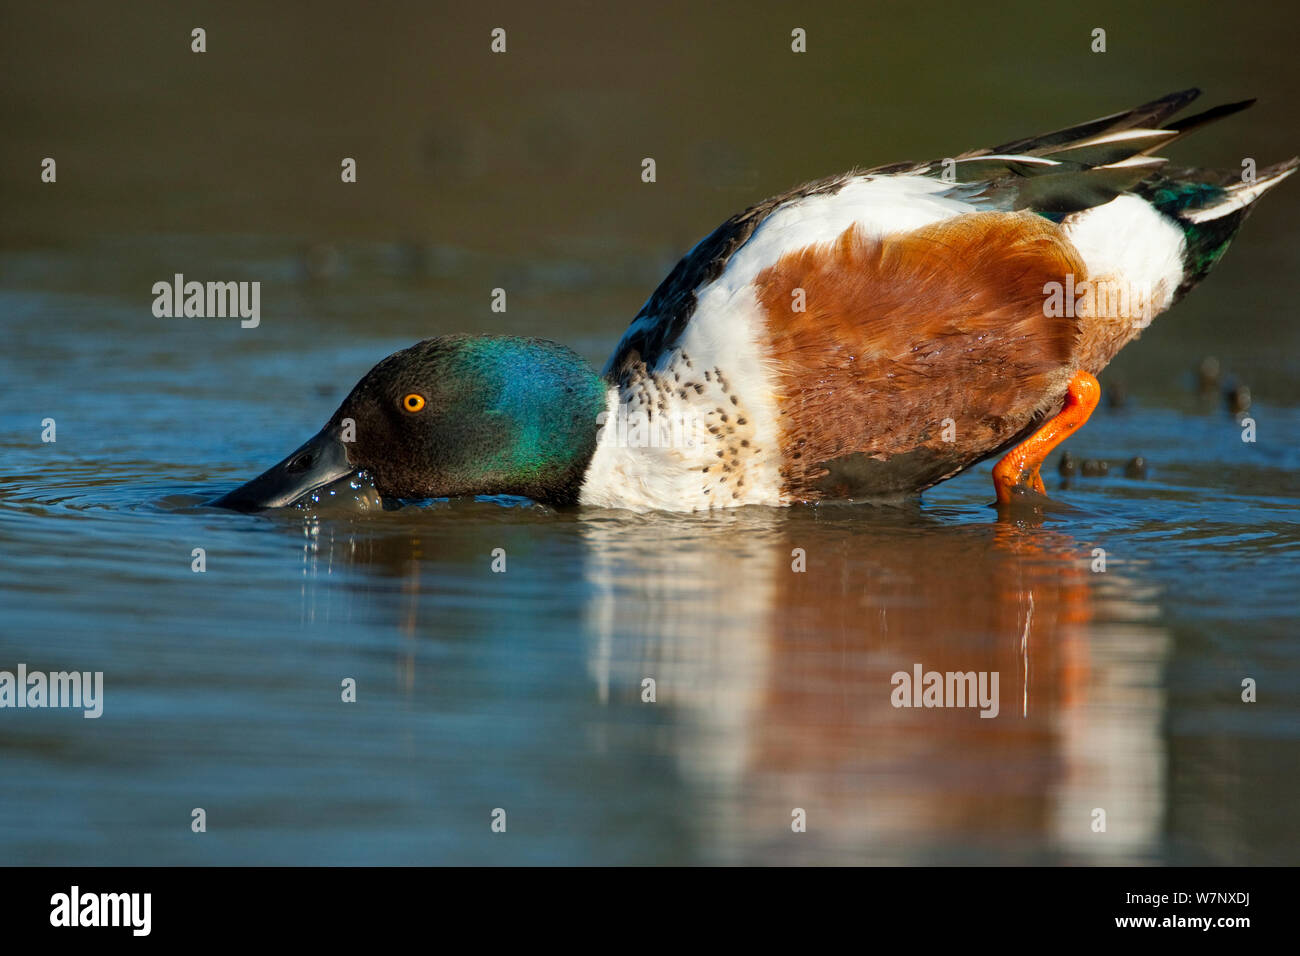 Anaheim ducks hi-res stock photography and images - Alamy